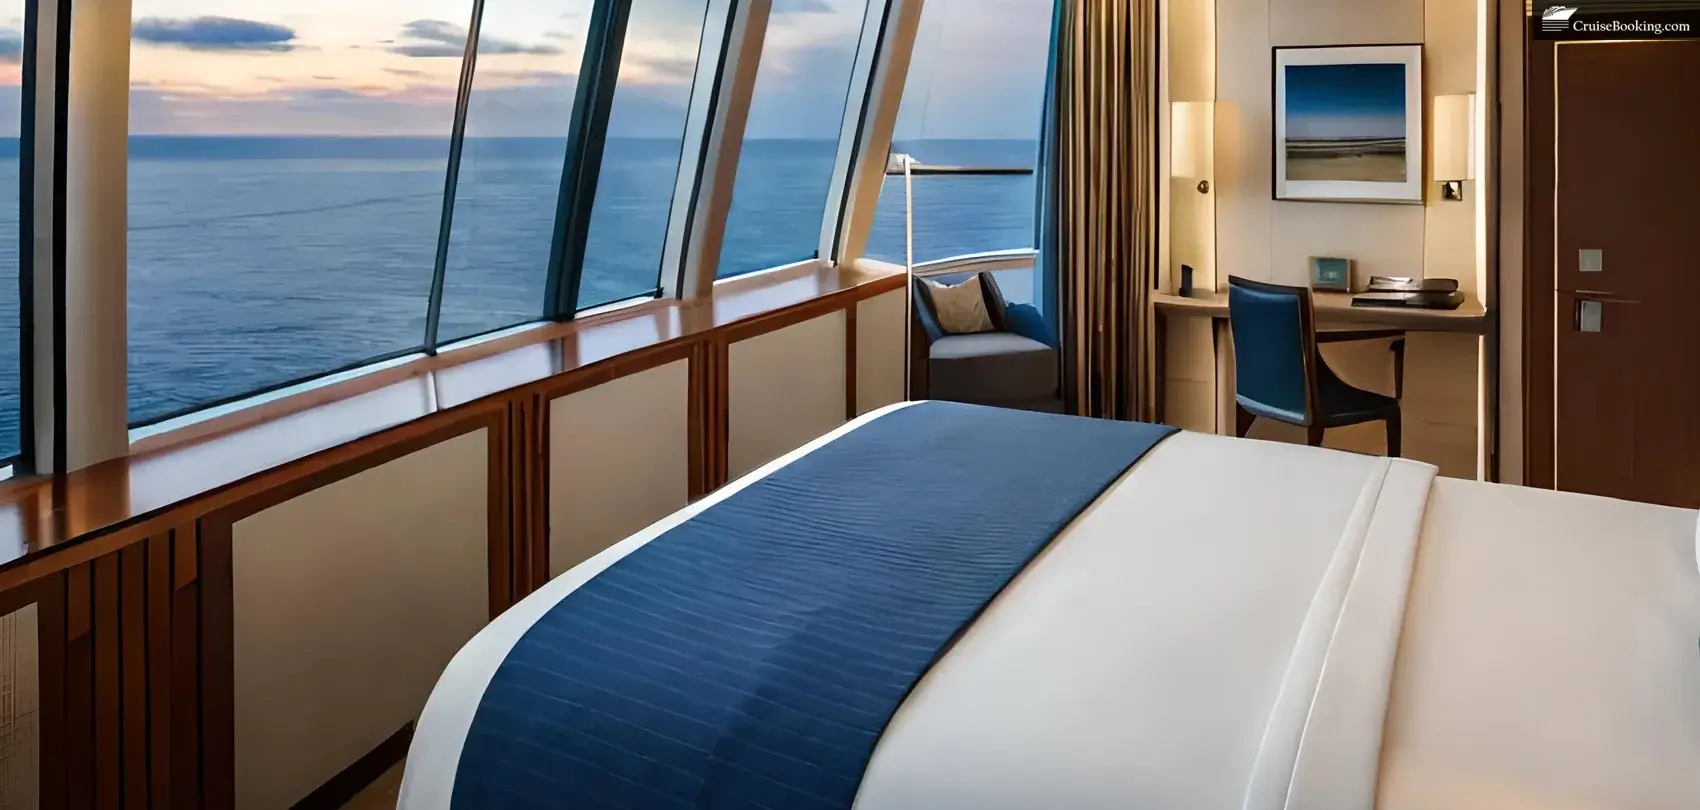 A cruise ship's view of the ocean and horizon.